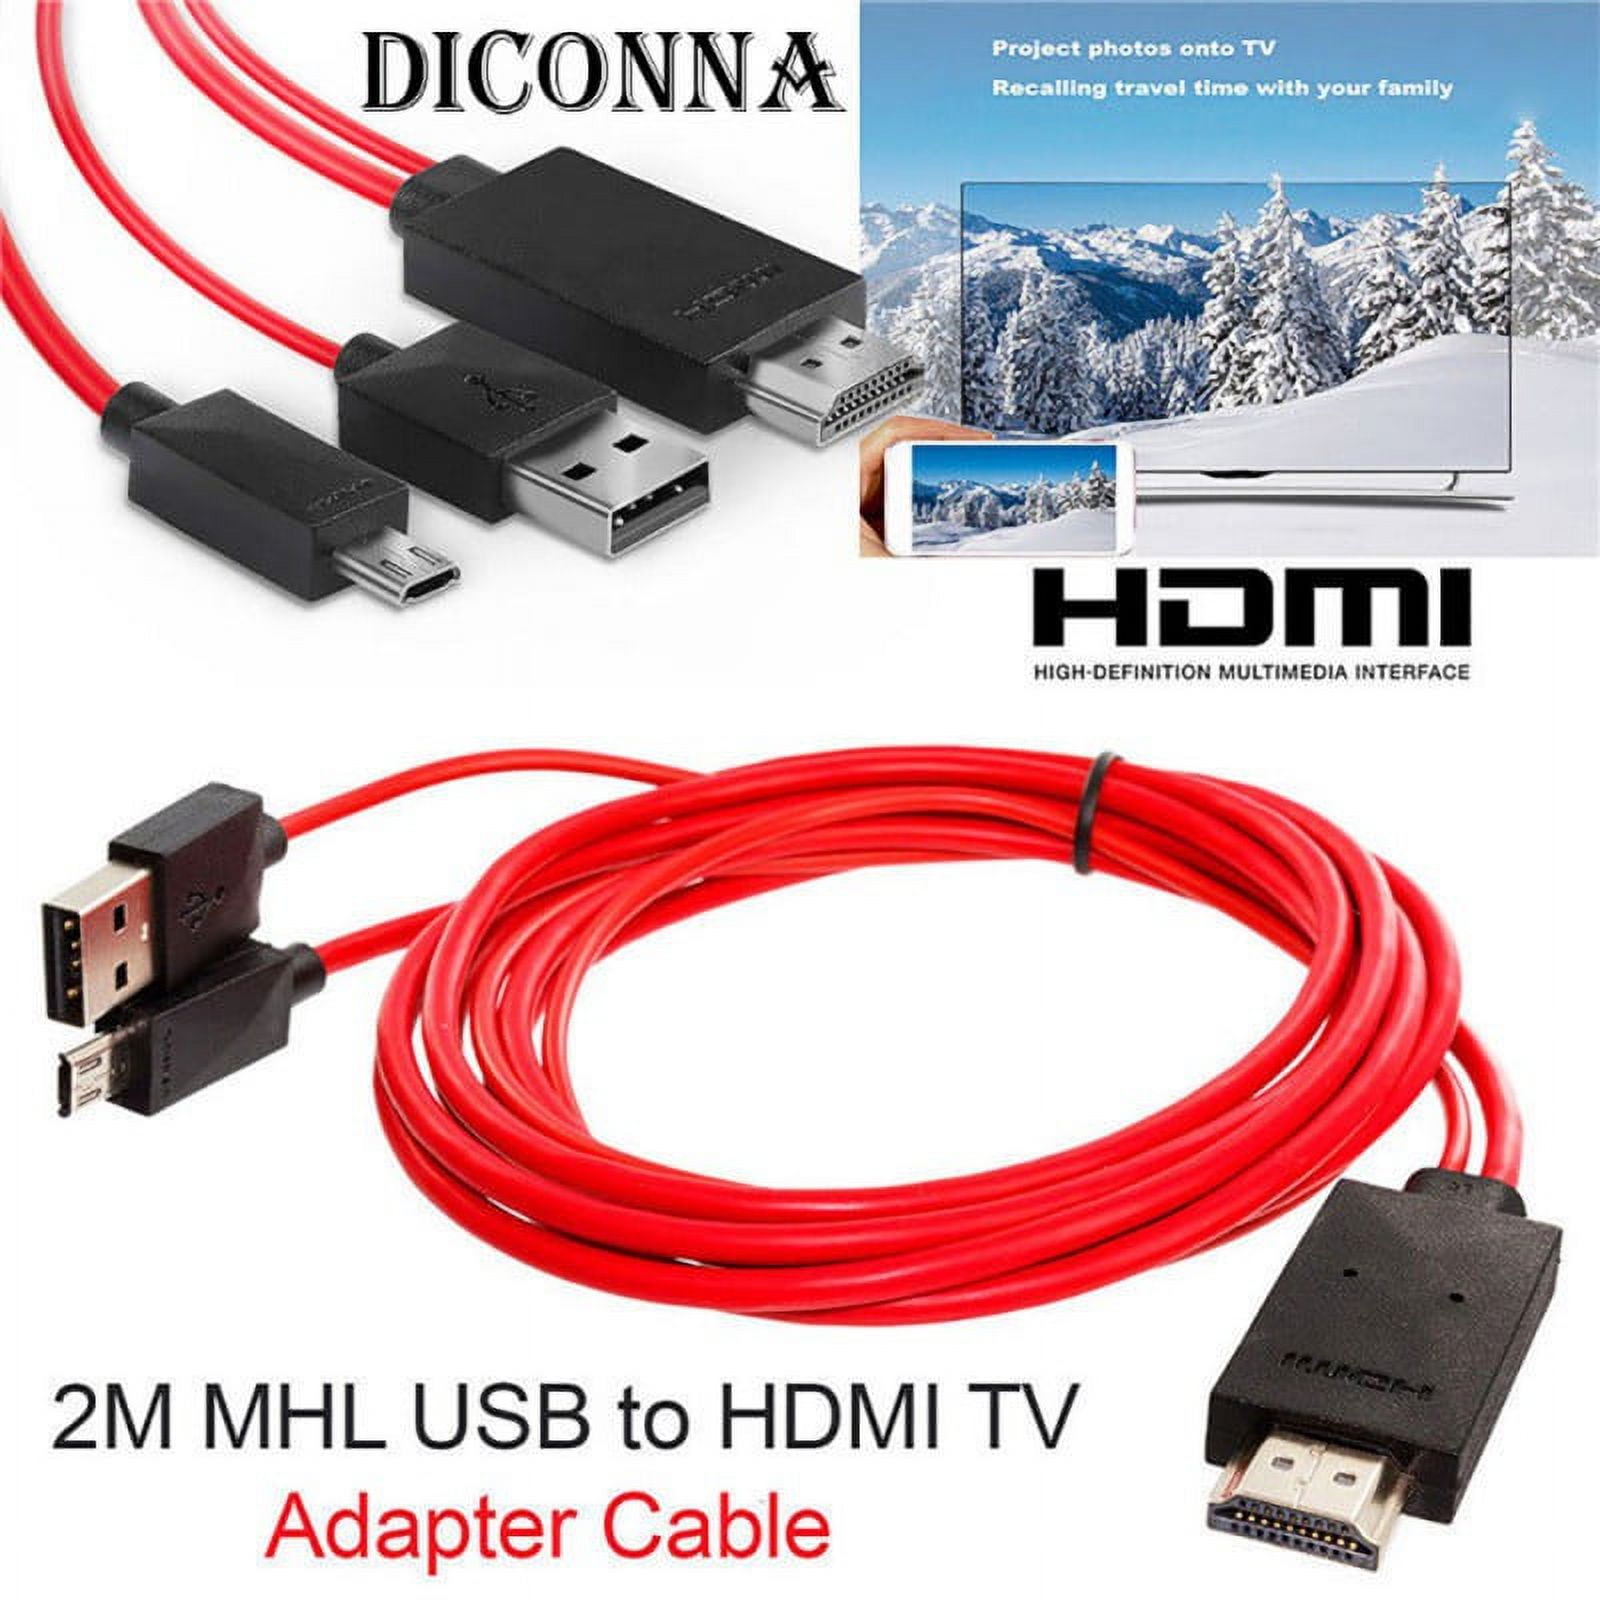 Micro USB to HDMI Cable Adapter, MHL 5pin Phone to HDMI 1080P 4K Video  Graphic for Samsung Galaxy/LG/Huawei/Android Smart Phones That with MHL